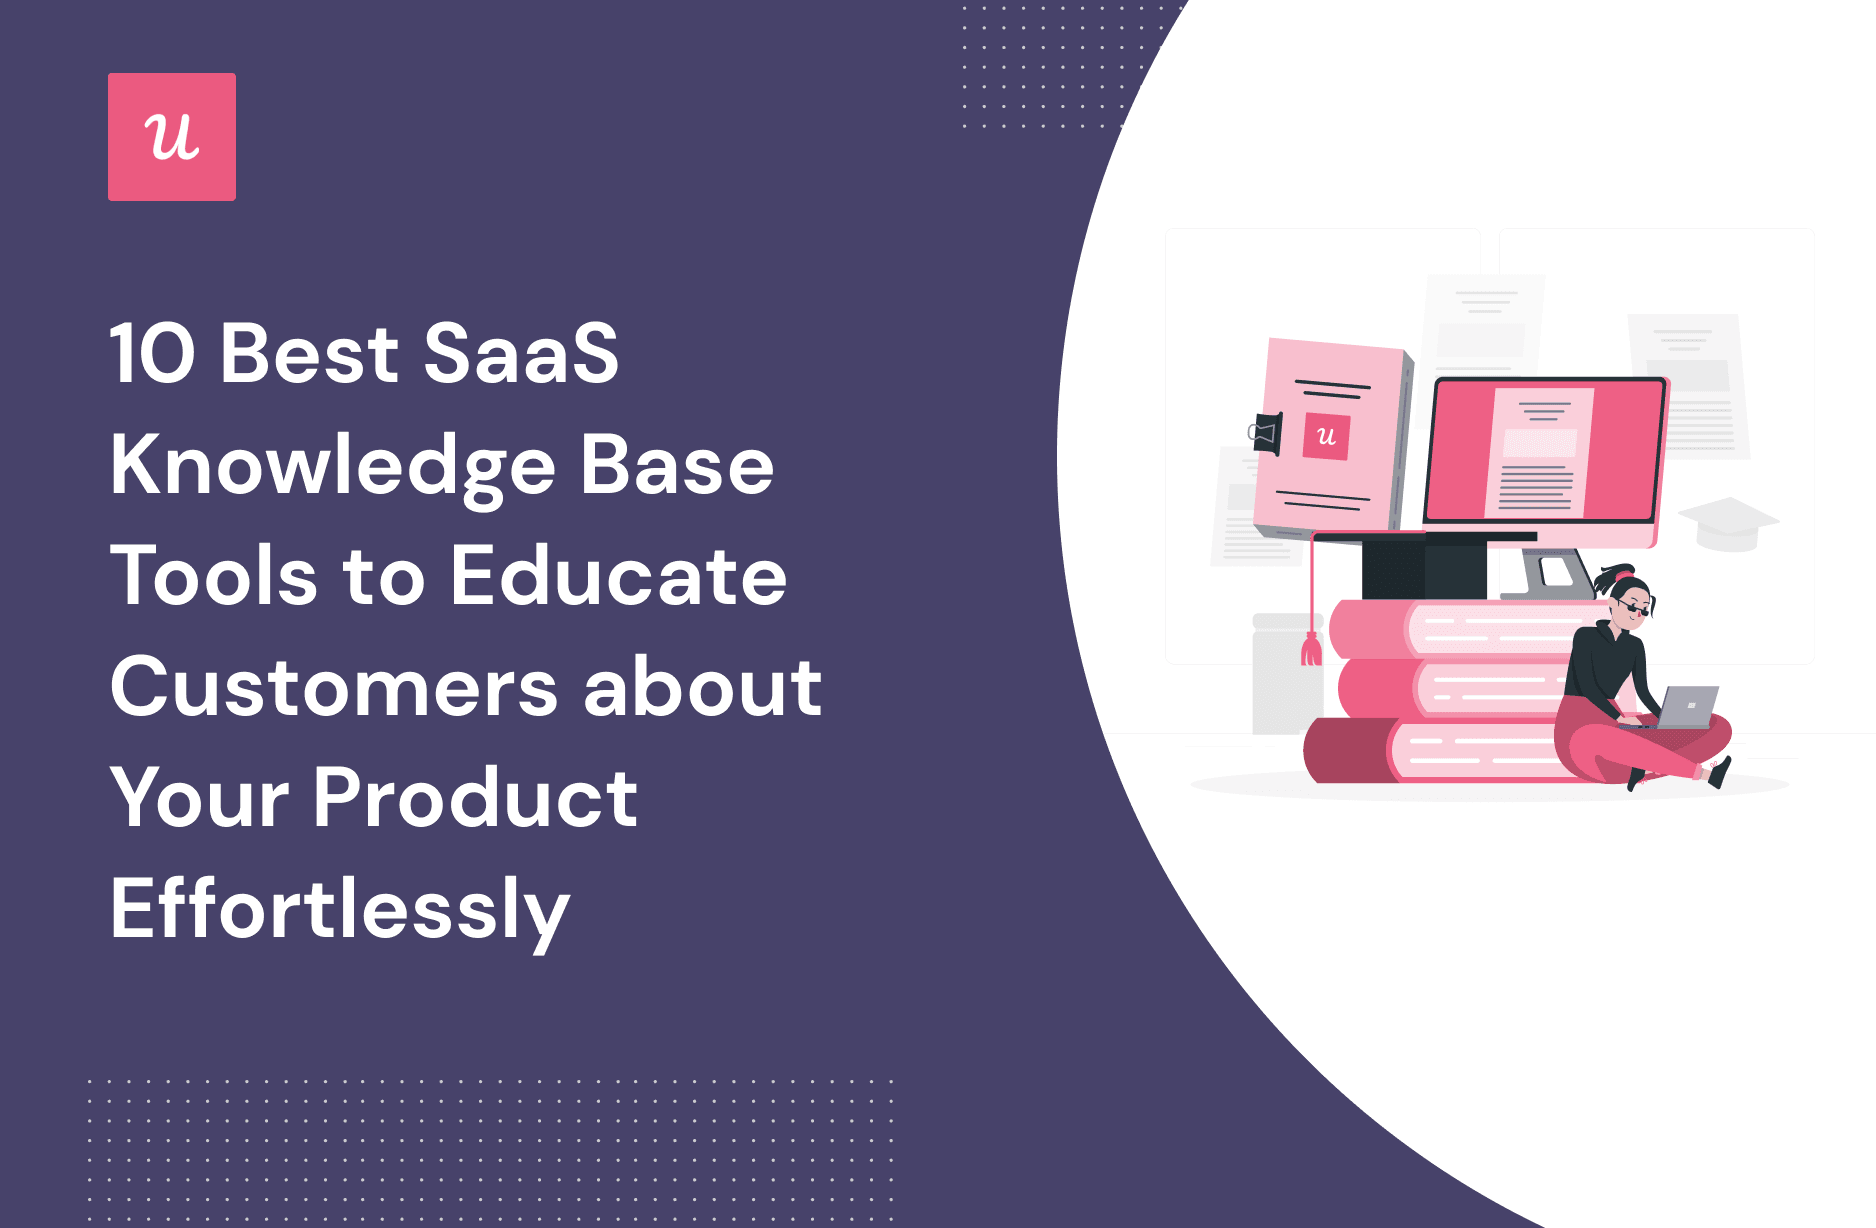 10 Best SaaS Knowledge Base Tools To Educate Customers About Your Product Effortlessly cover